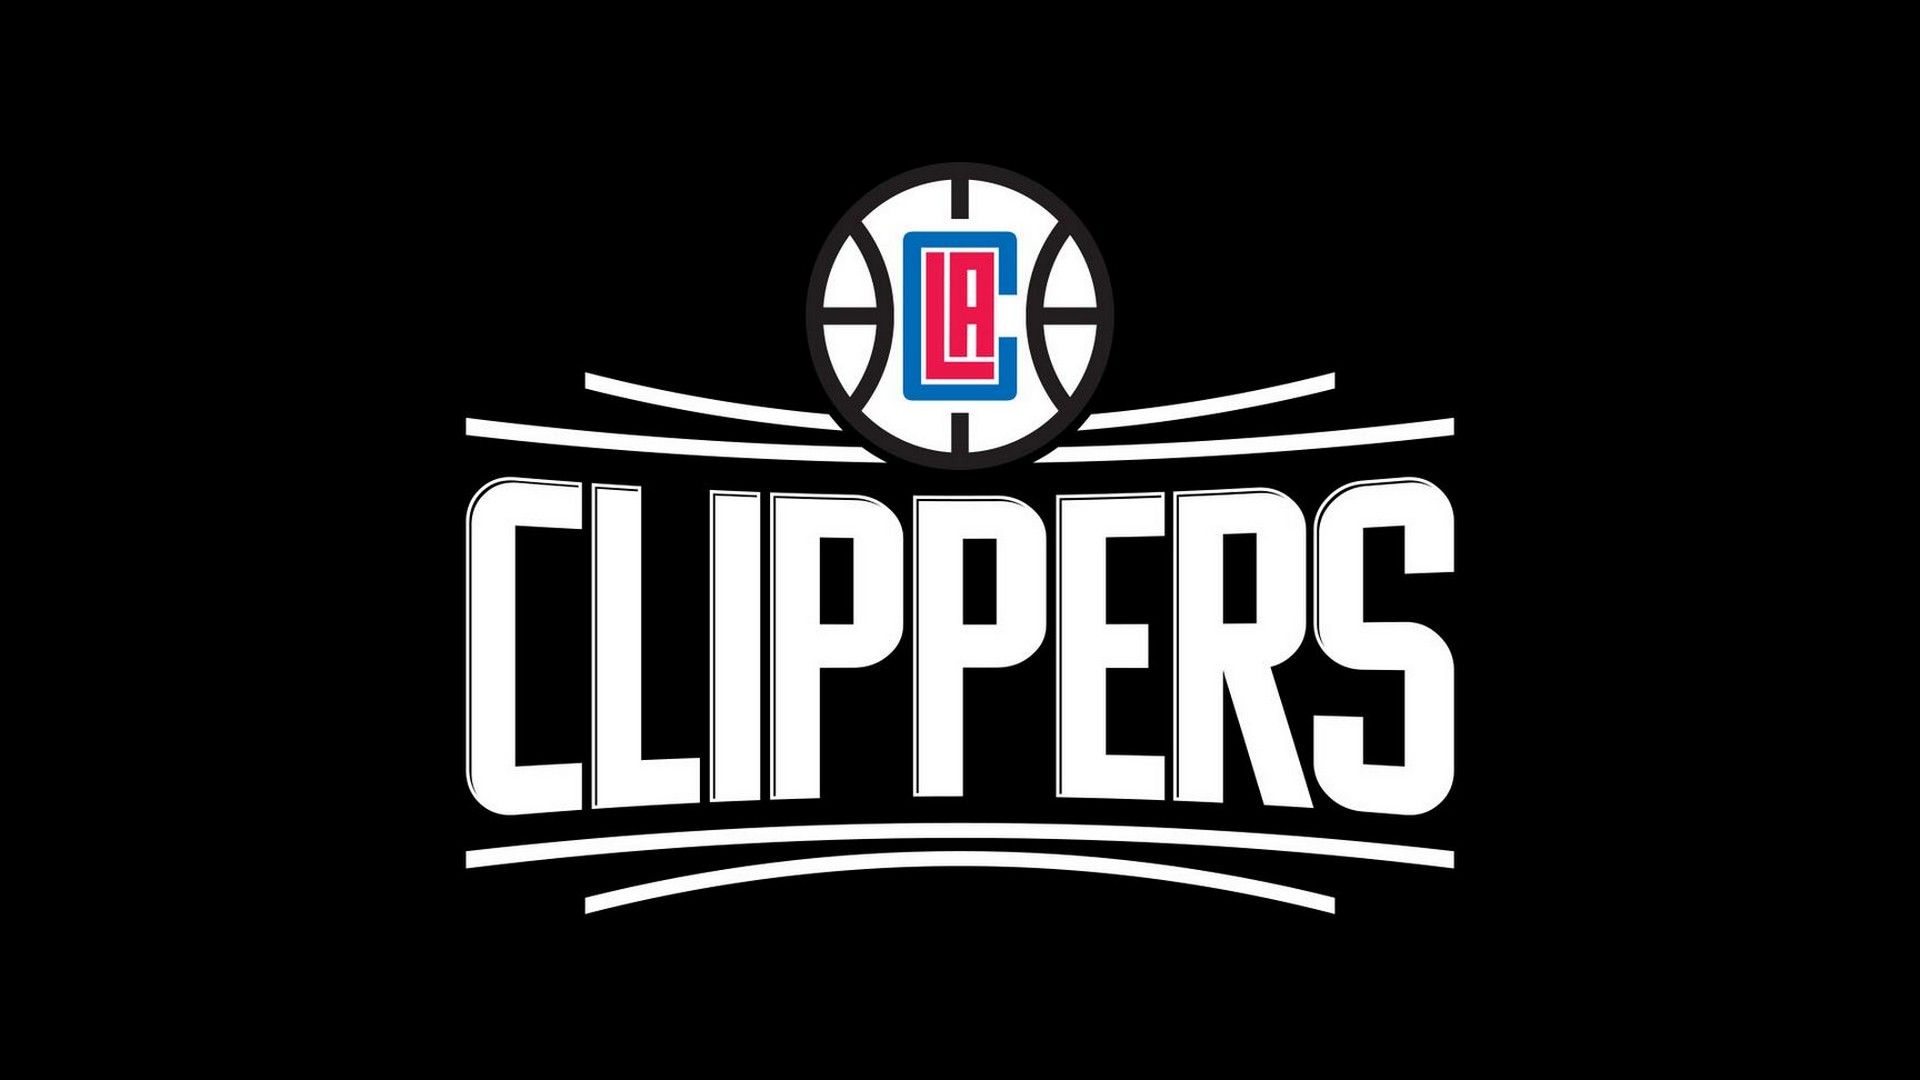 Los Angeles Clippers Wallpaper For Mac Background Basketball Wallpaper. Los angeles clippers, Basketball wallpaper, La clippers